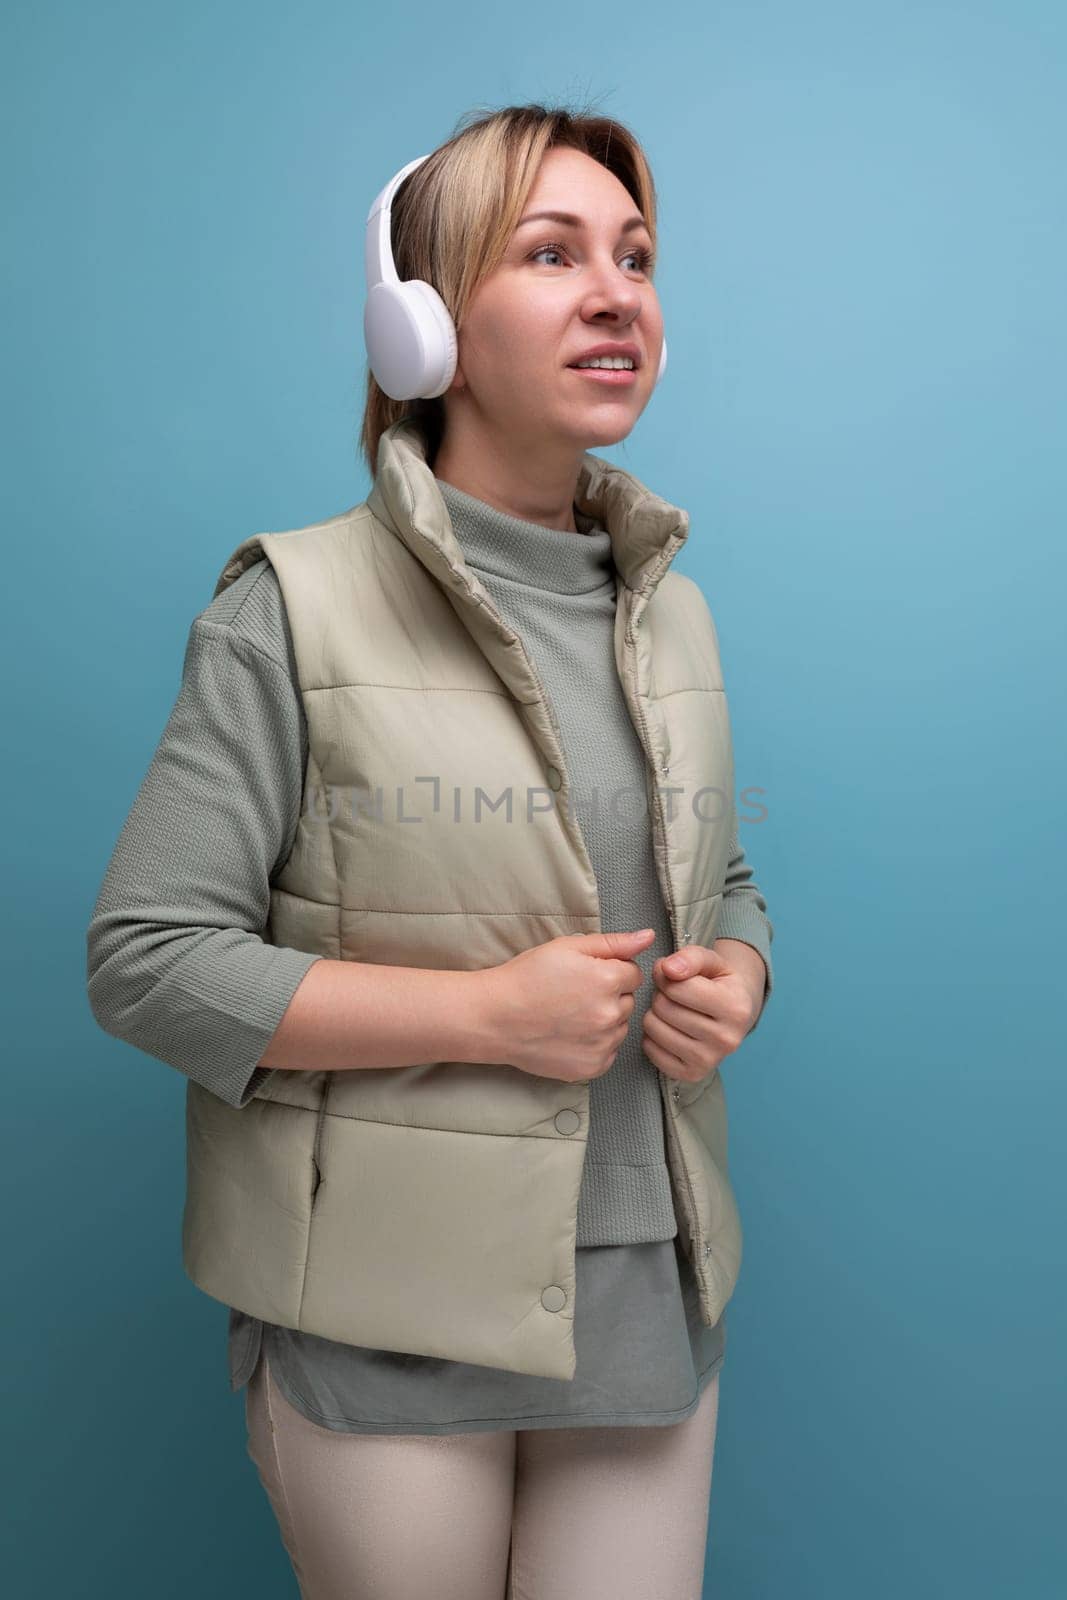 blond pleasant young woman with wireless headphones on studio background.